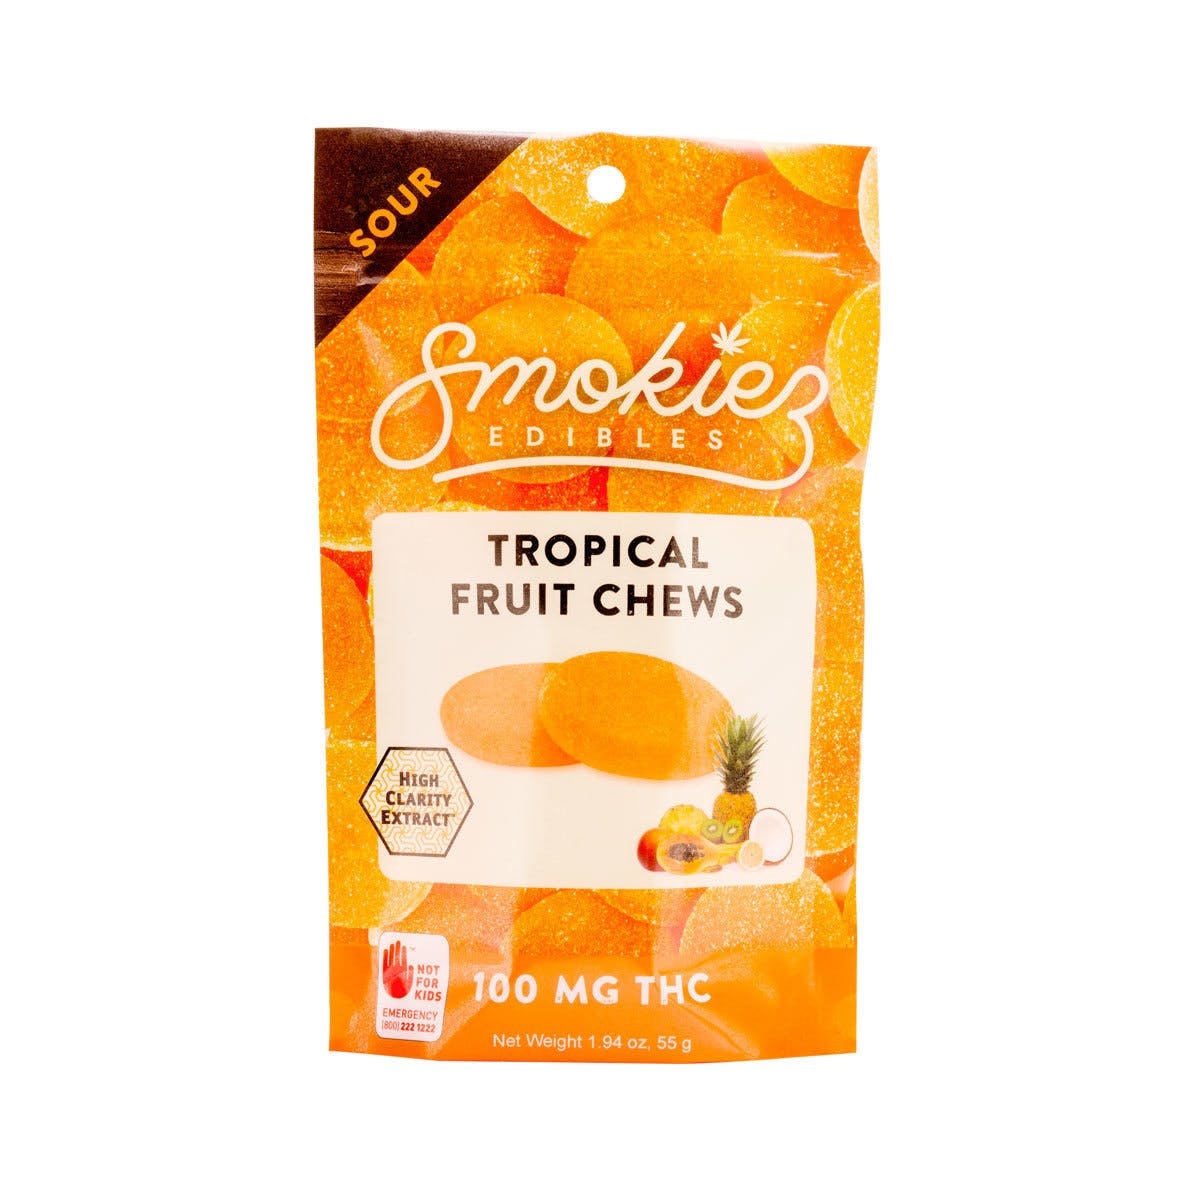 marijuana-dispensaries-the-high-note-west-in-los-angeles-sour-tropical-fruit-chews-2c-100-mg